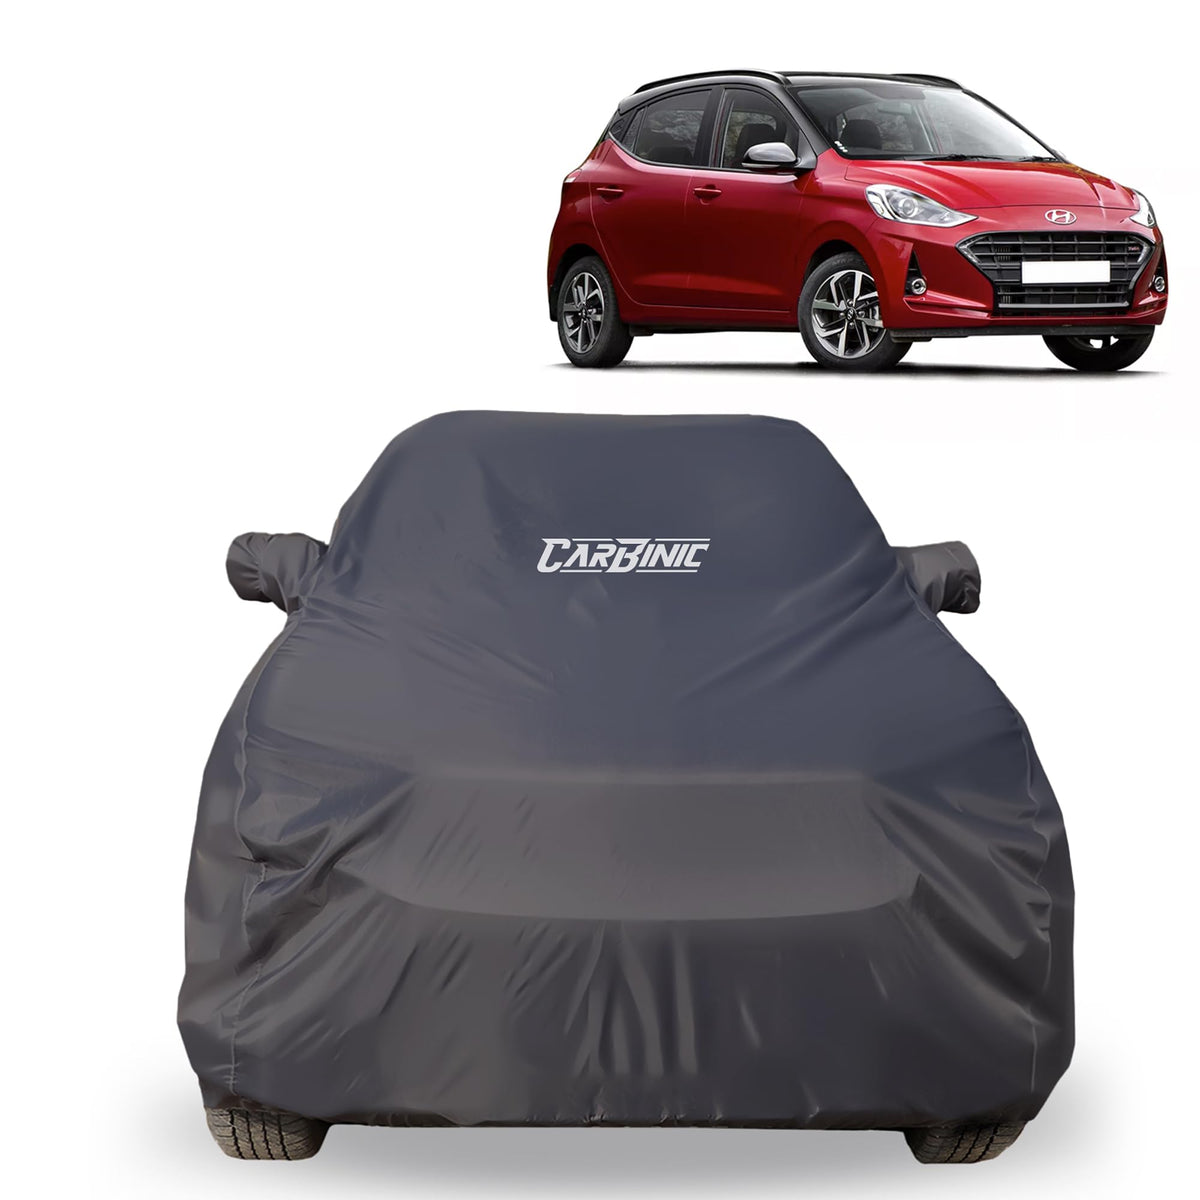 CARBINIC Car Body Cover for Hyundai Eon 2019 | Water Resistant, UV Protection Car Cover | Scratchproof Body Shield | All-Weather Cover | Mirror Pocket & Antenna | Car Accessories Dusk Grey